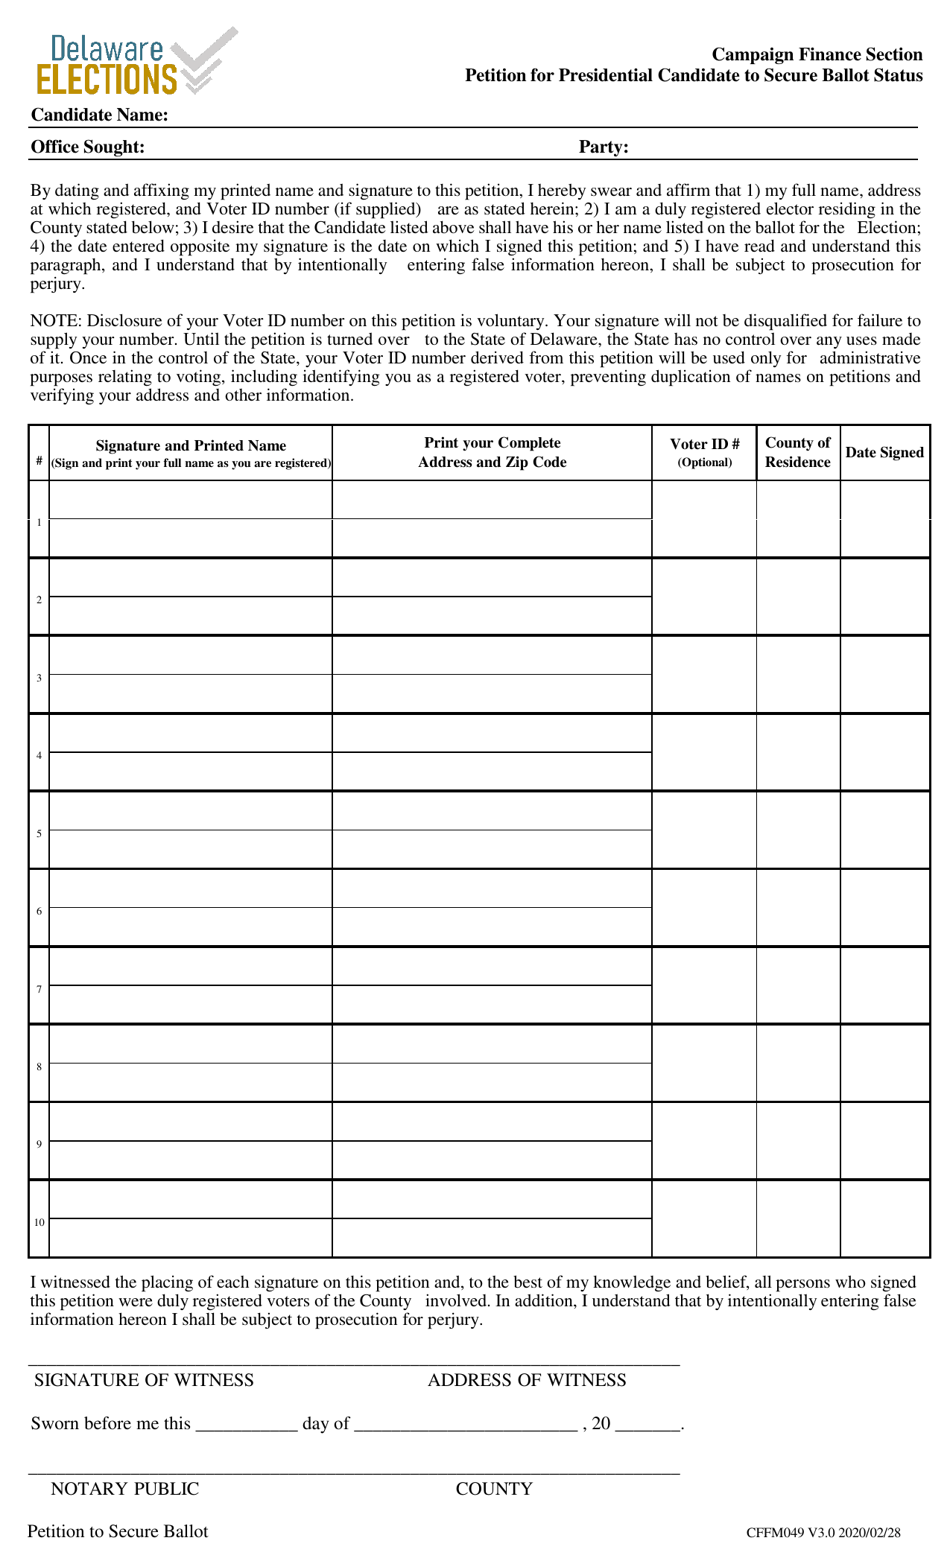 Form CFFM049 Petition for Presidential Candidate to Secure Ballot Status - Delaware, Page 1